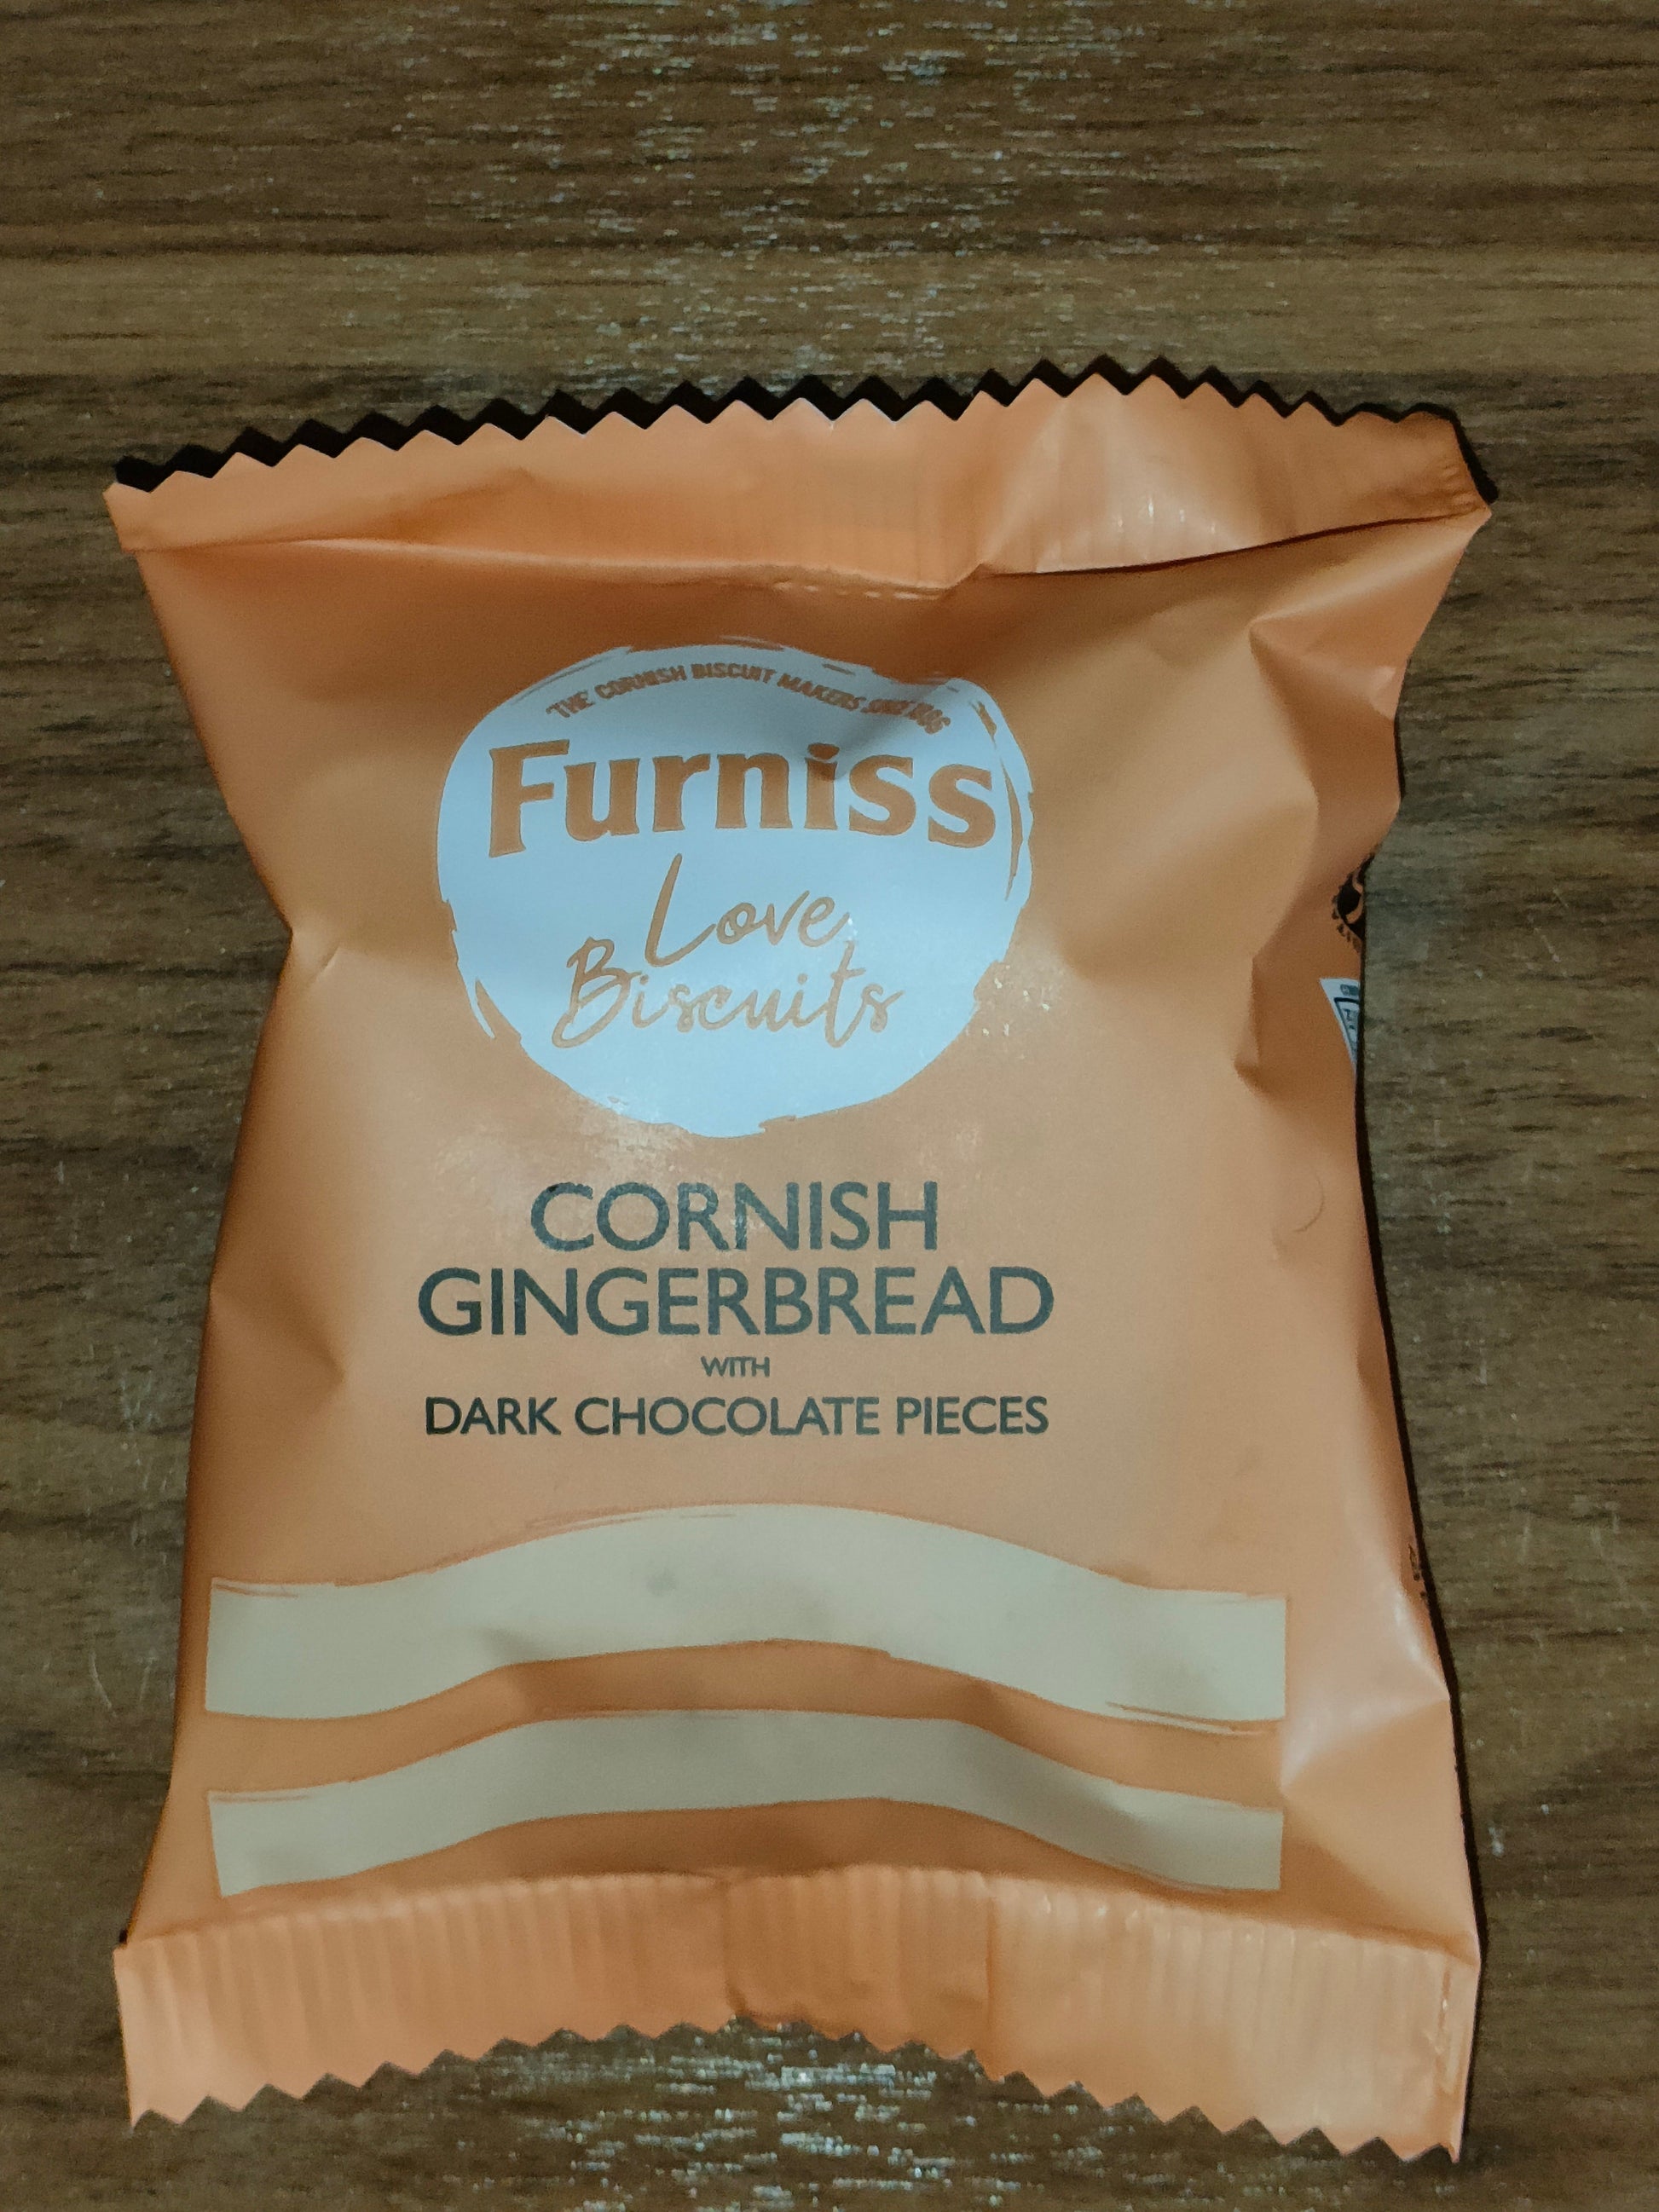 Furniss Cornish gingerbread with dark chocolate pieces twin pack - The Cornish Scone Company